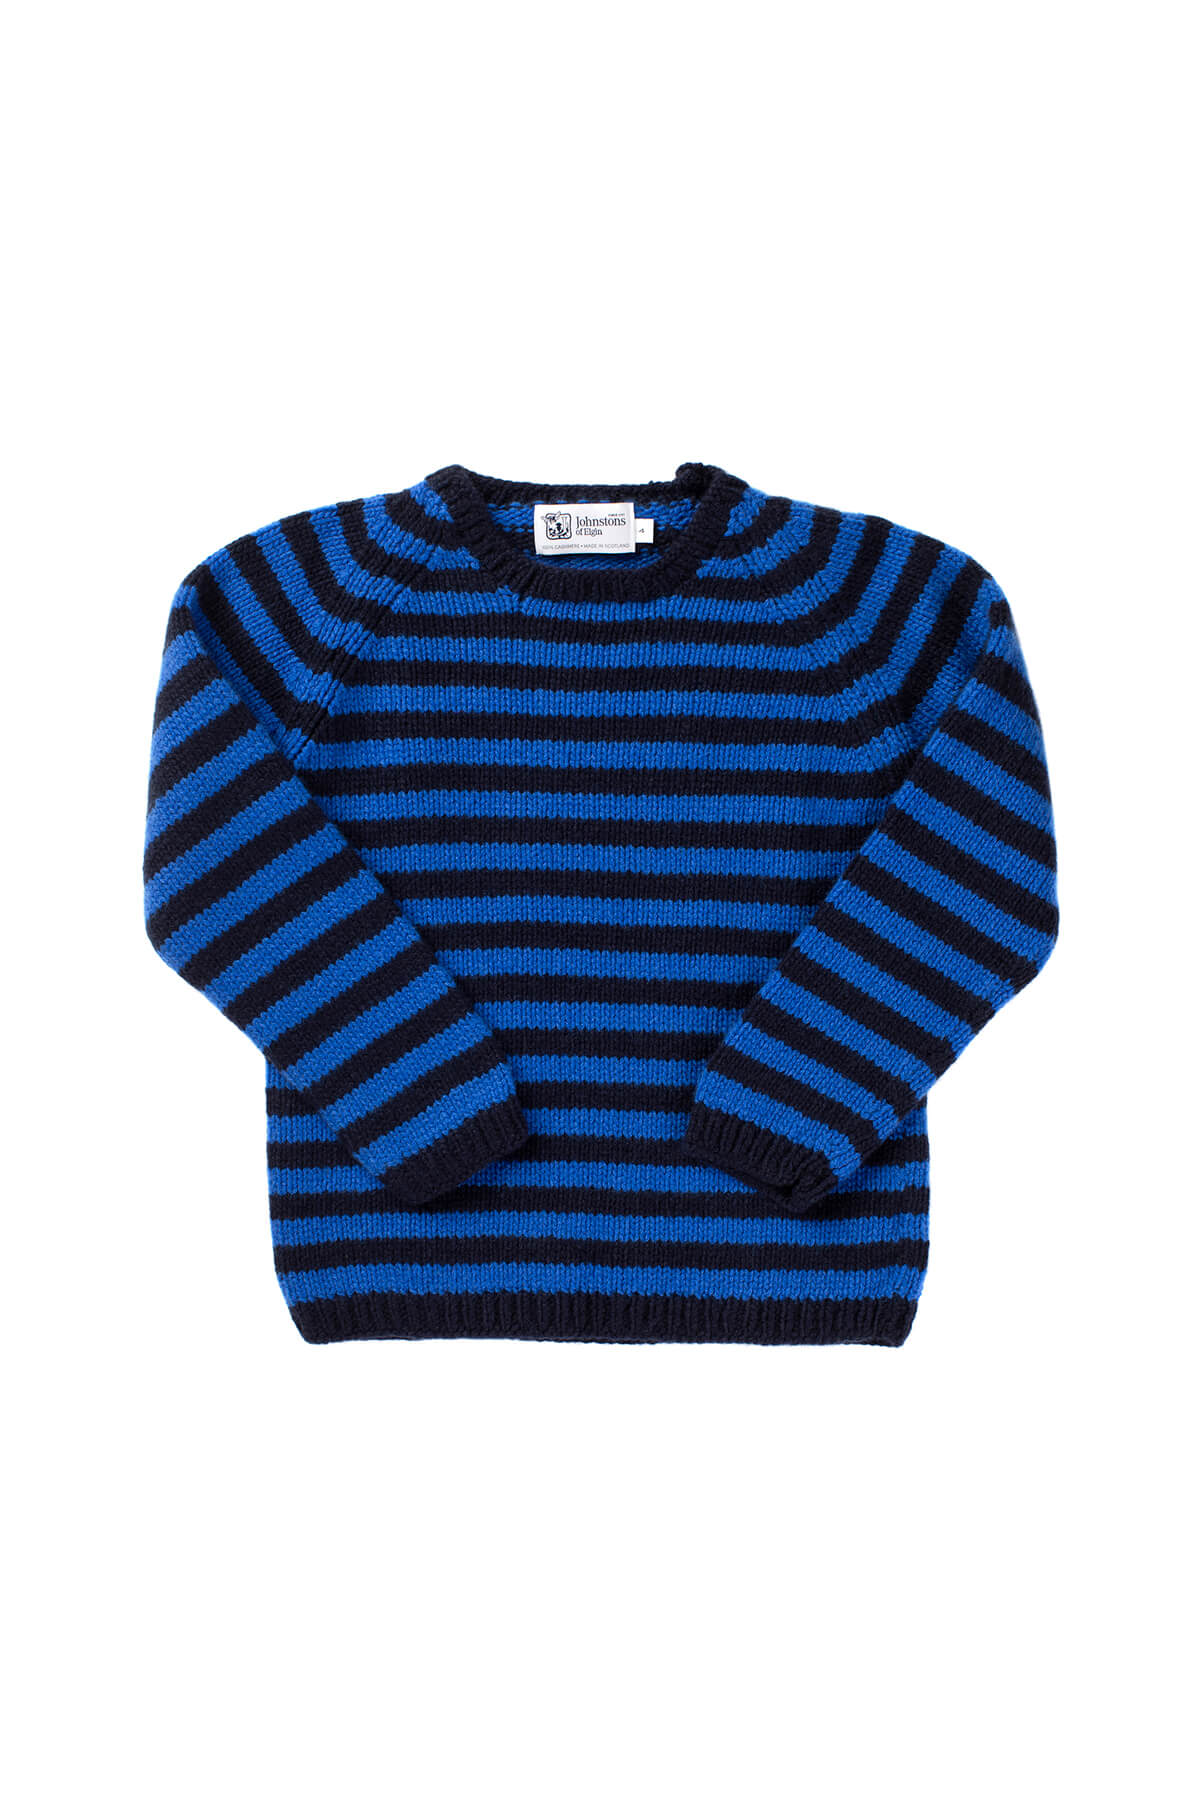 Johnstons of Elgin Stripy Hand Knitted Children's Cashmere Jumper in Navy & Bright Blue on white background 76199ZZZ107